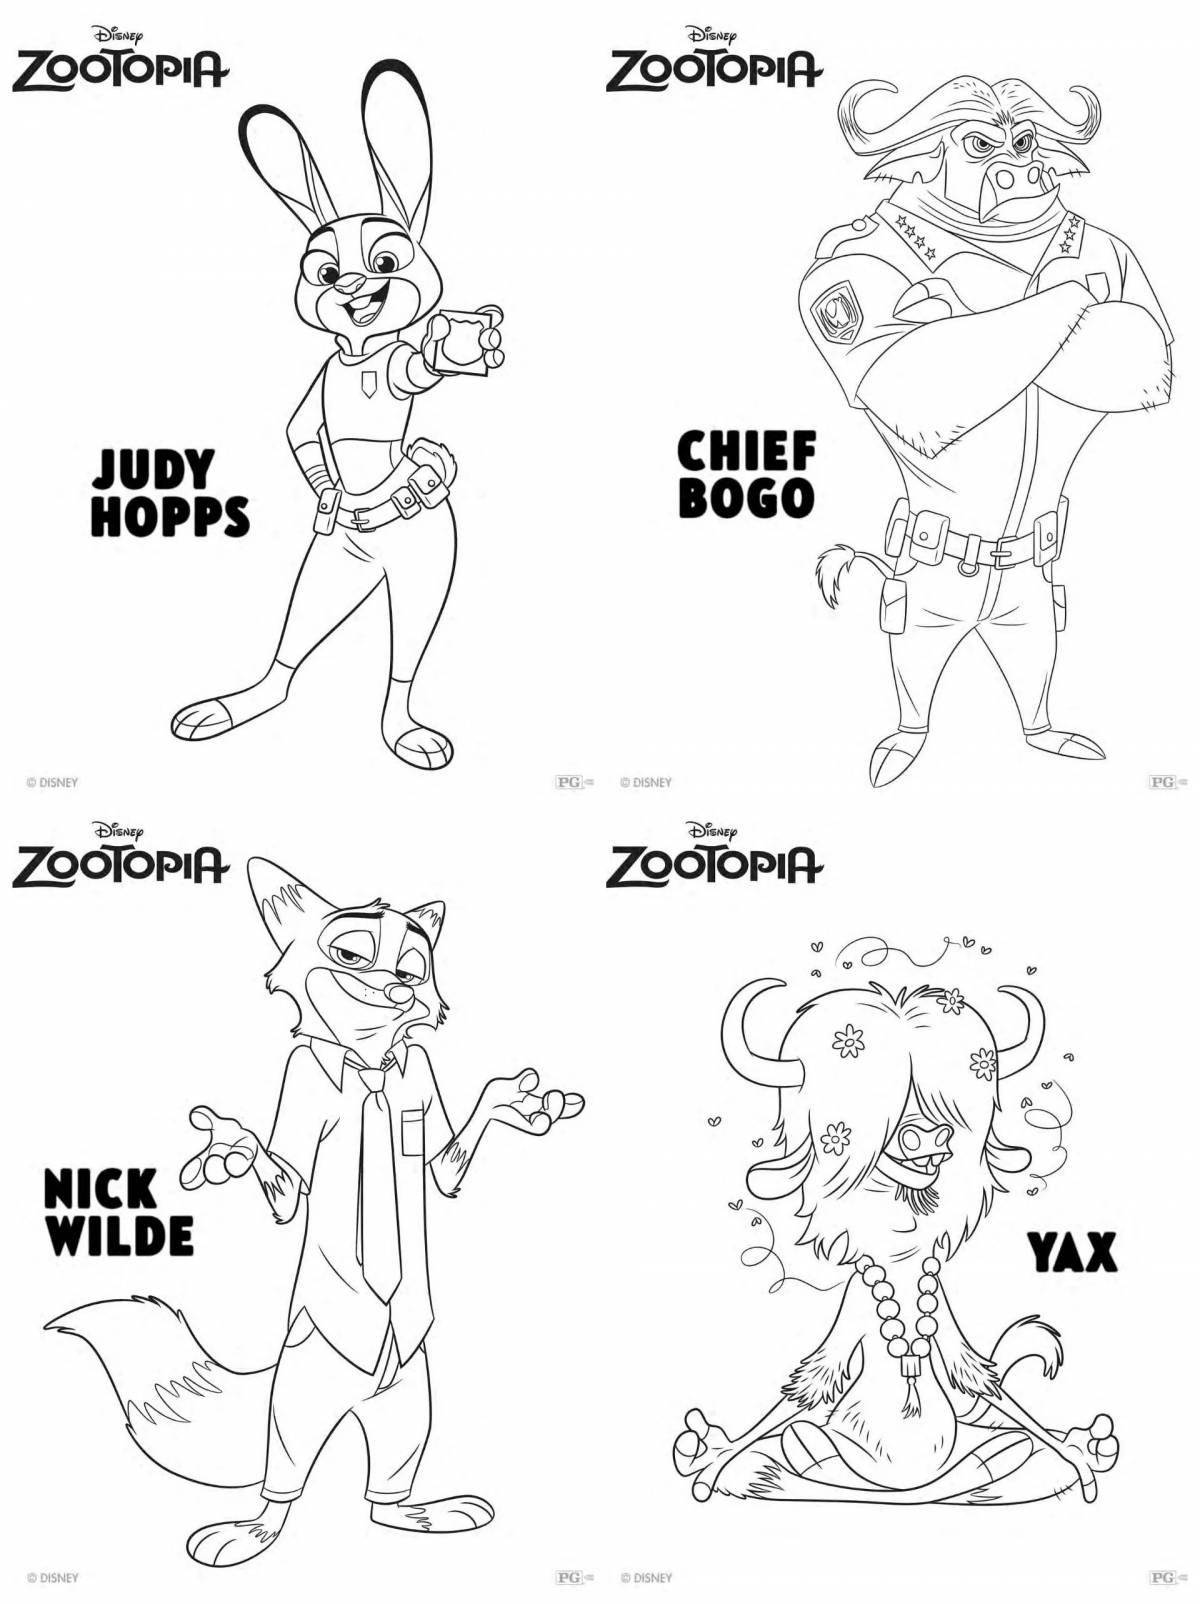 Judy hopps glitter coloring page